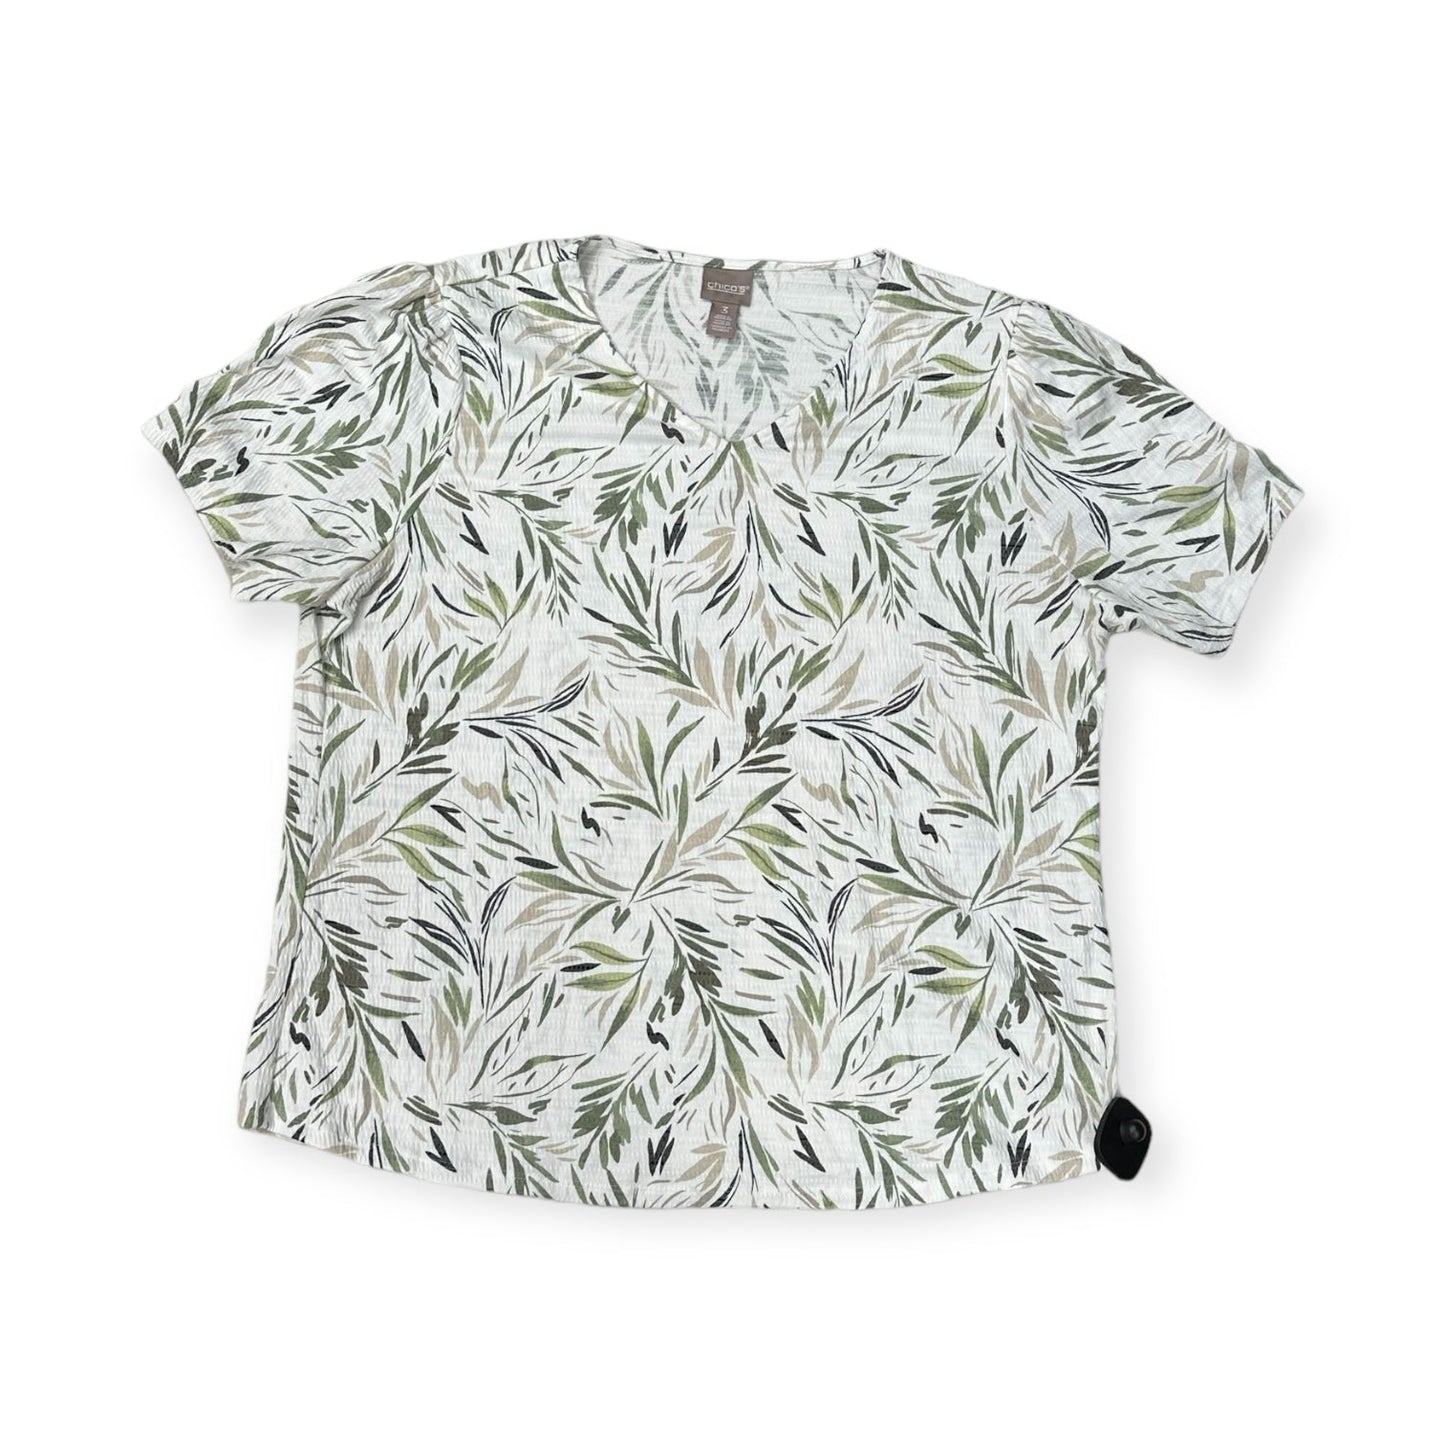 Tropical Print Top Short Sleeve Chicos